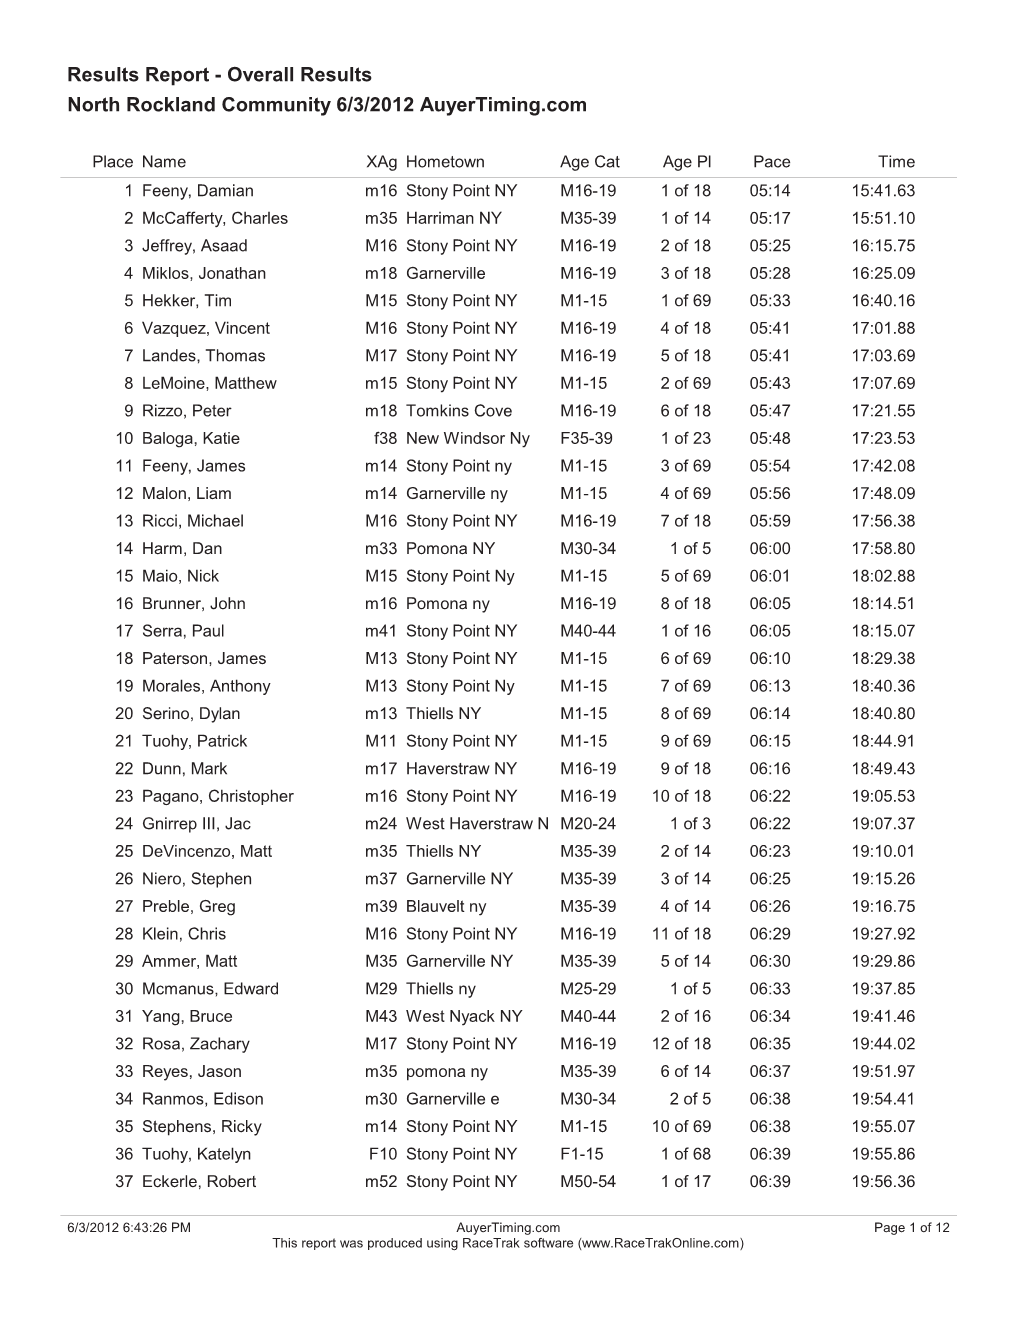 North Rockland Community 6/3/2012 Auyertiming.Com Results Report